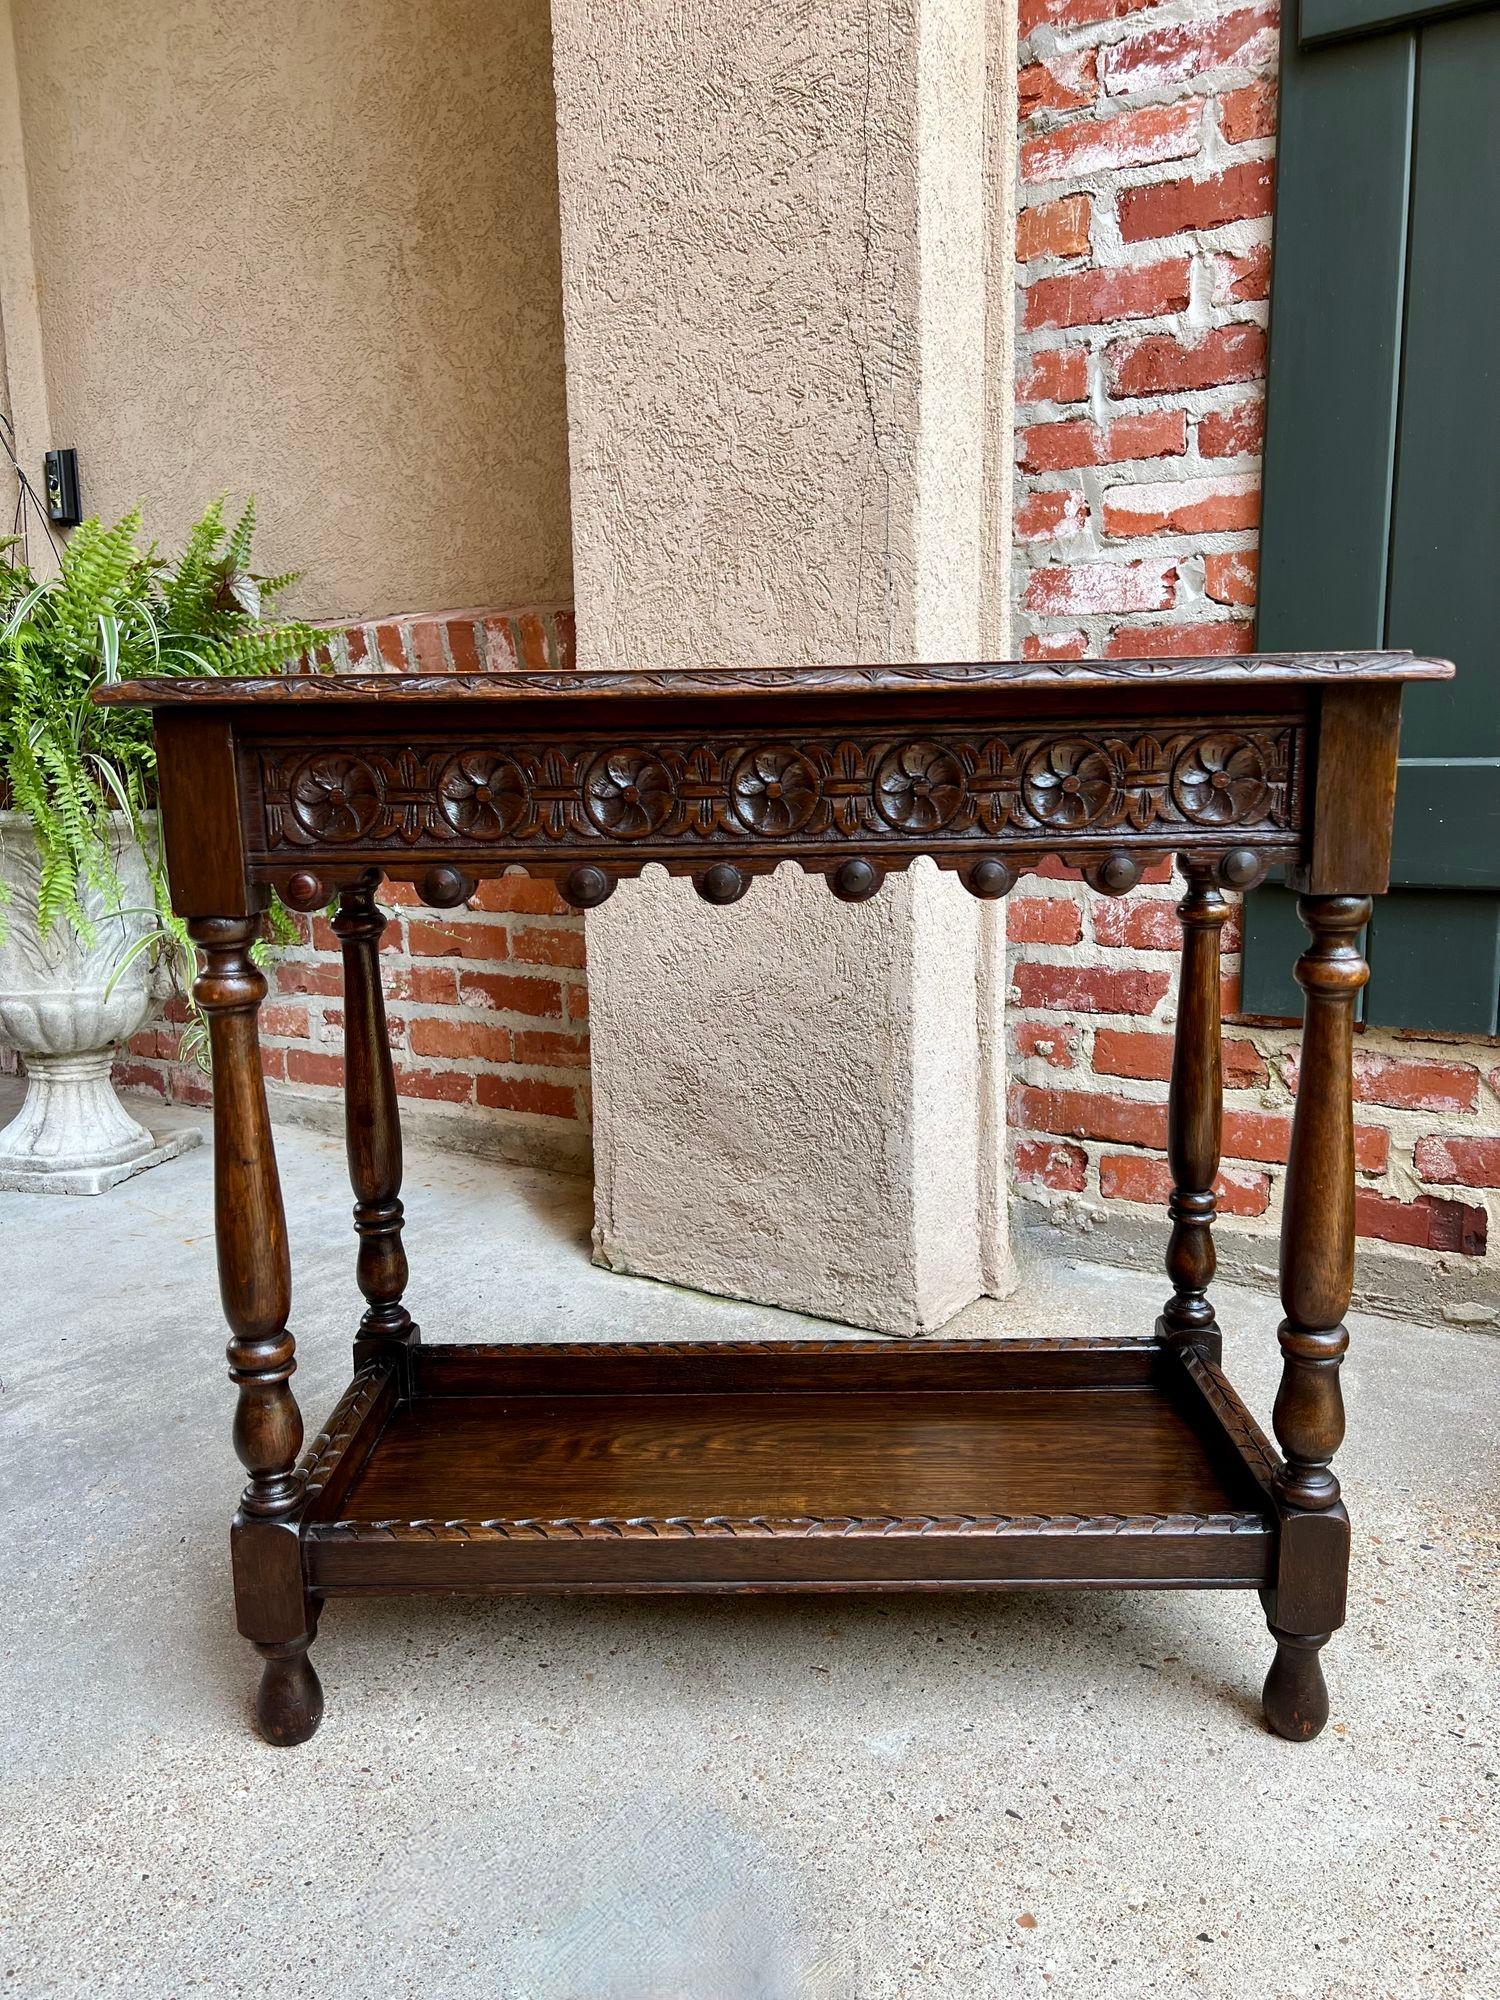 Antique English Hall Sofa Table Petite Carved Oak Library Arts & Crafts.

Direct from England, a lovely antique hall table with beautiful silhouette and classic British style!
Fully carved table top with center flower medallion and scrolls that